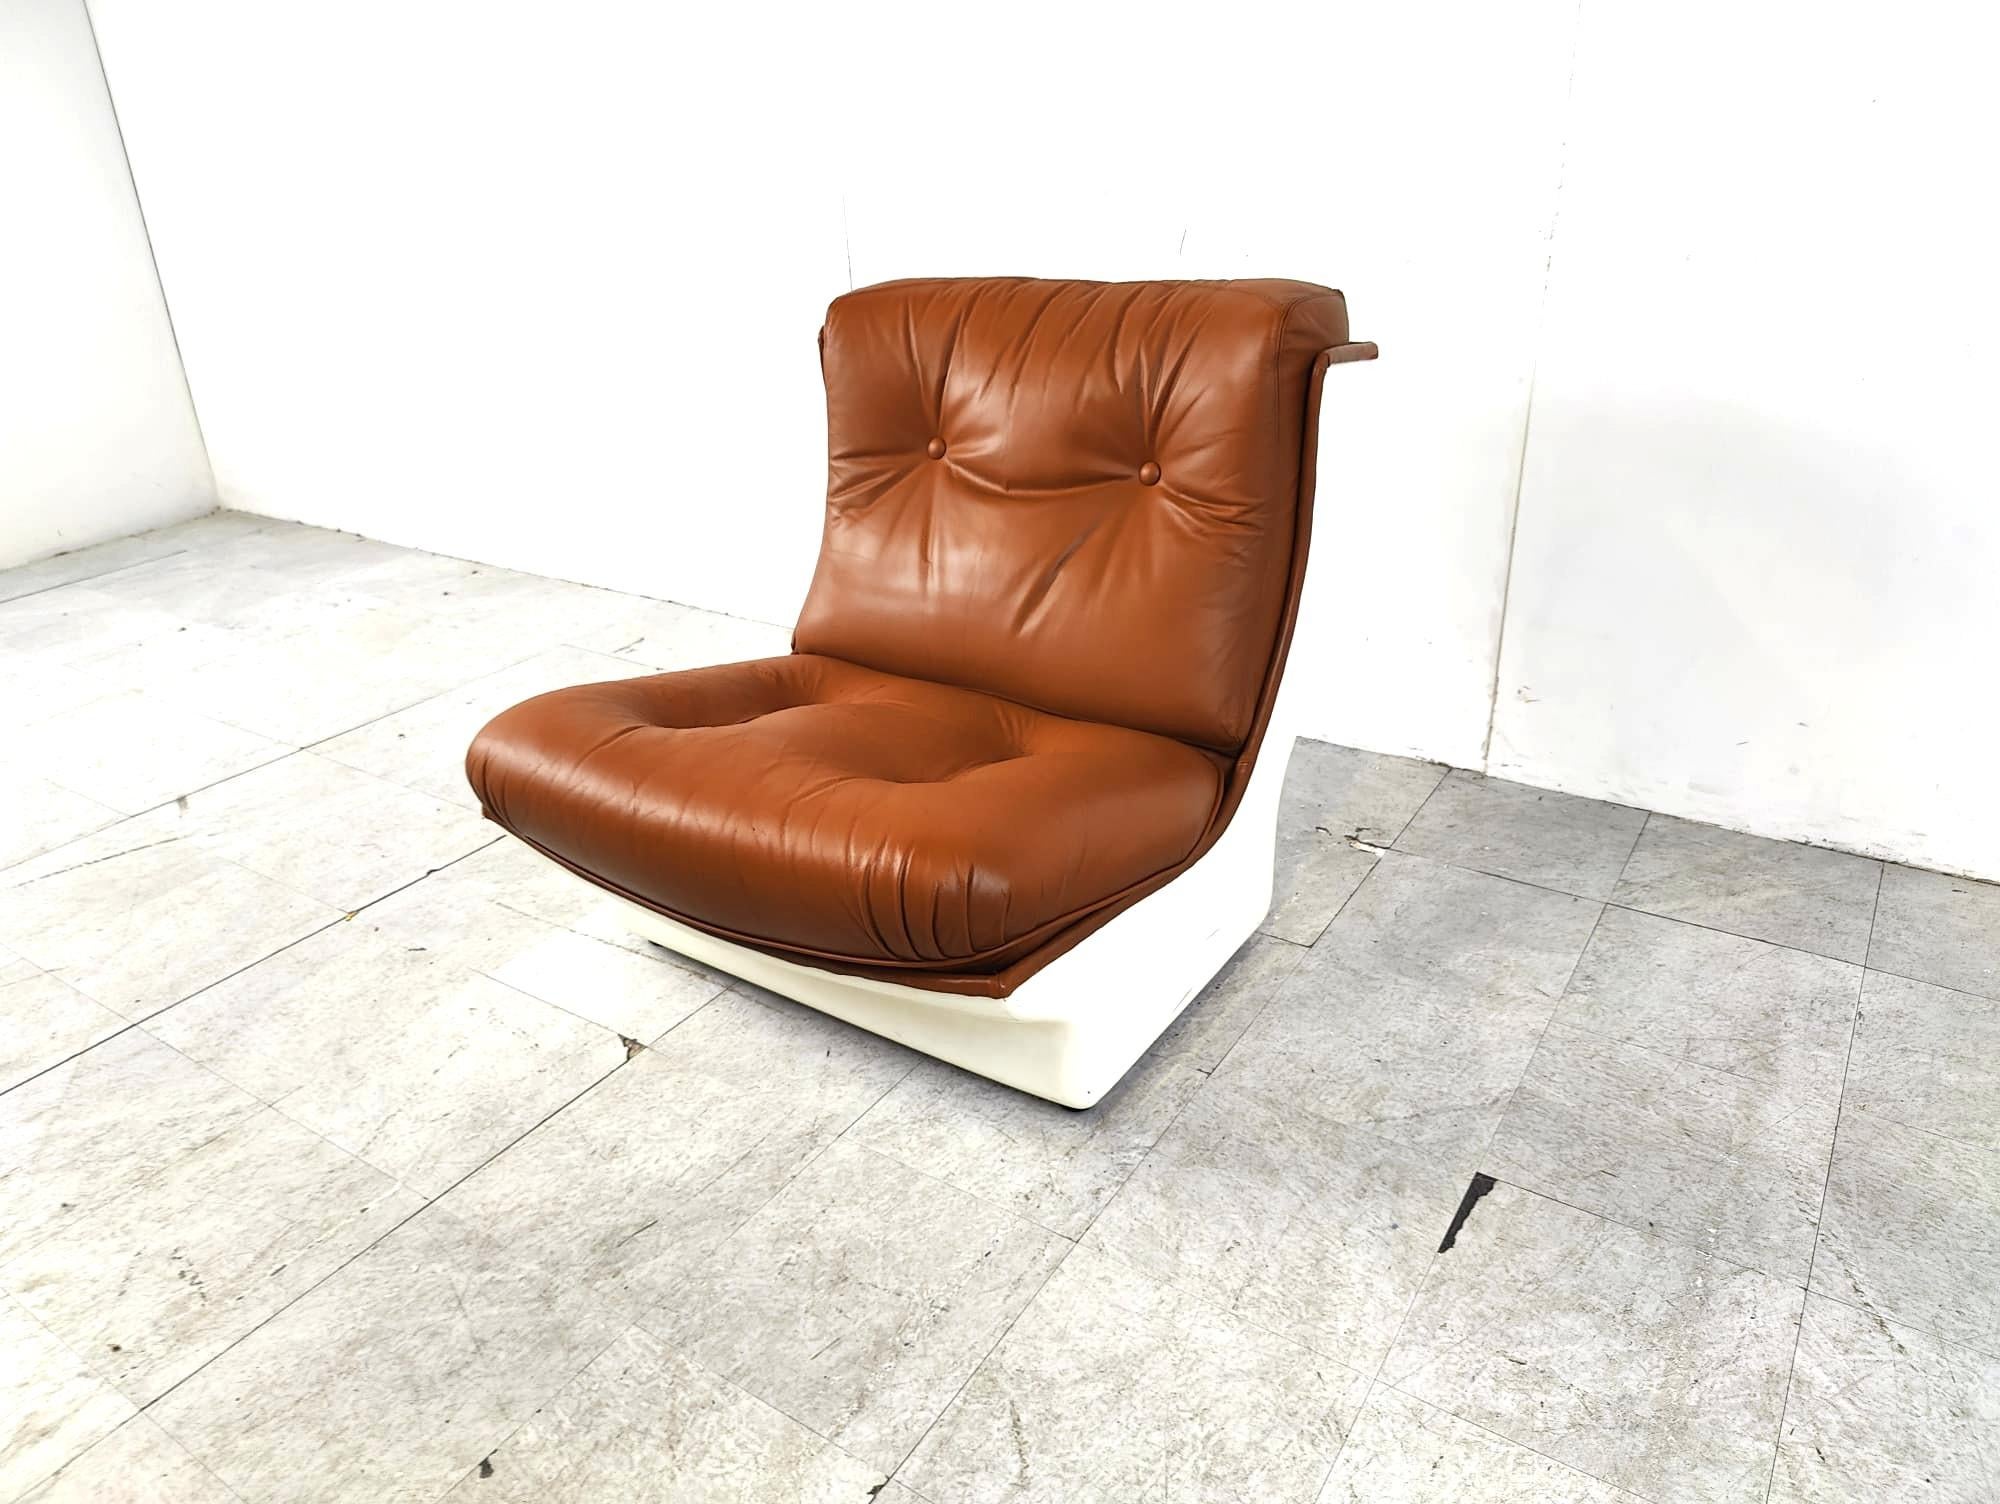 Space Age Space age leather lounge chair by Airborne international, 1970s For Sale